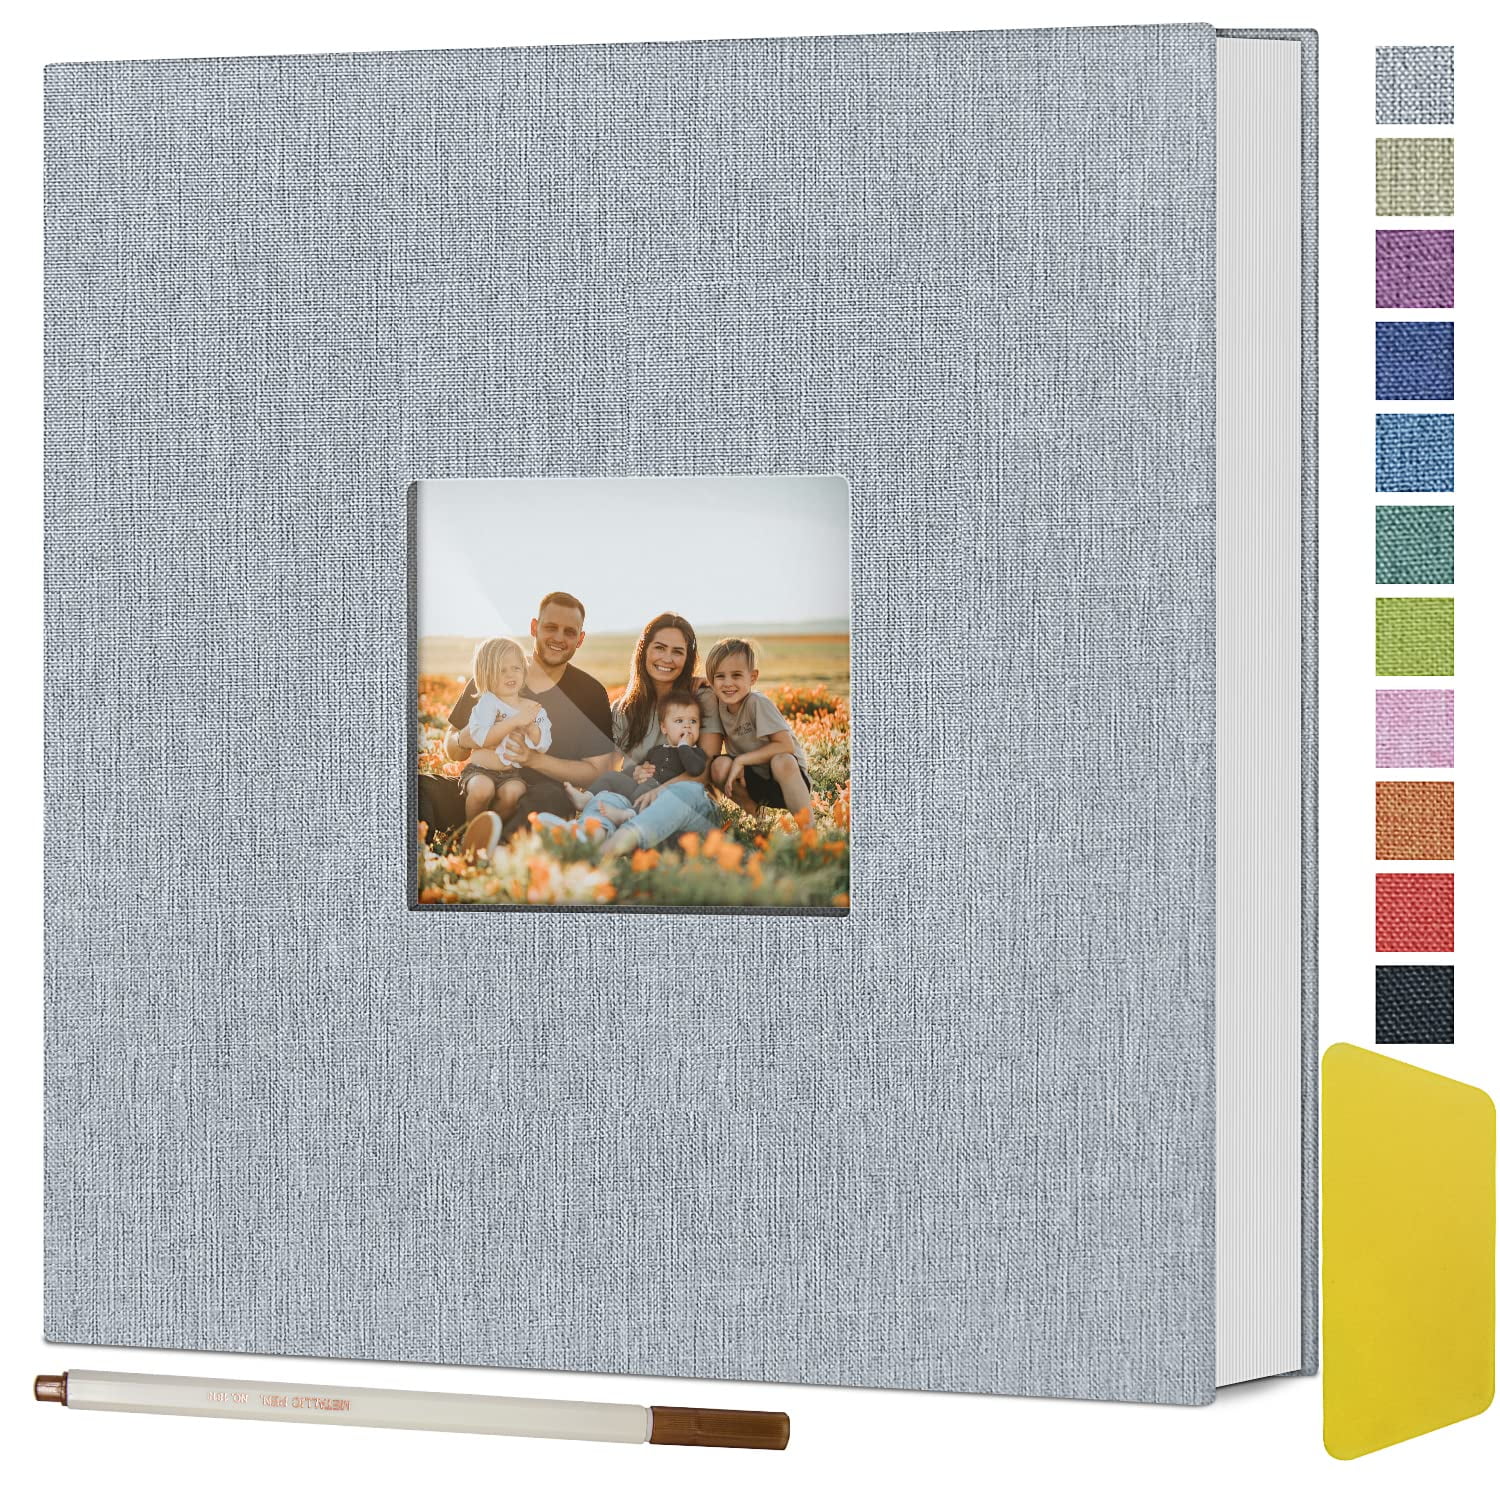 Spbapr Large Photo Album Self Adhesive 60 Pages Linen cover DIY Magnetic  Scrapbook album with A Metal Pen Hold 3x5 4x6 5